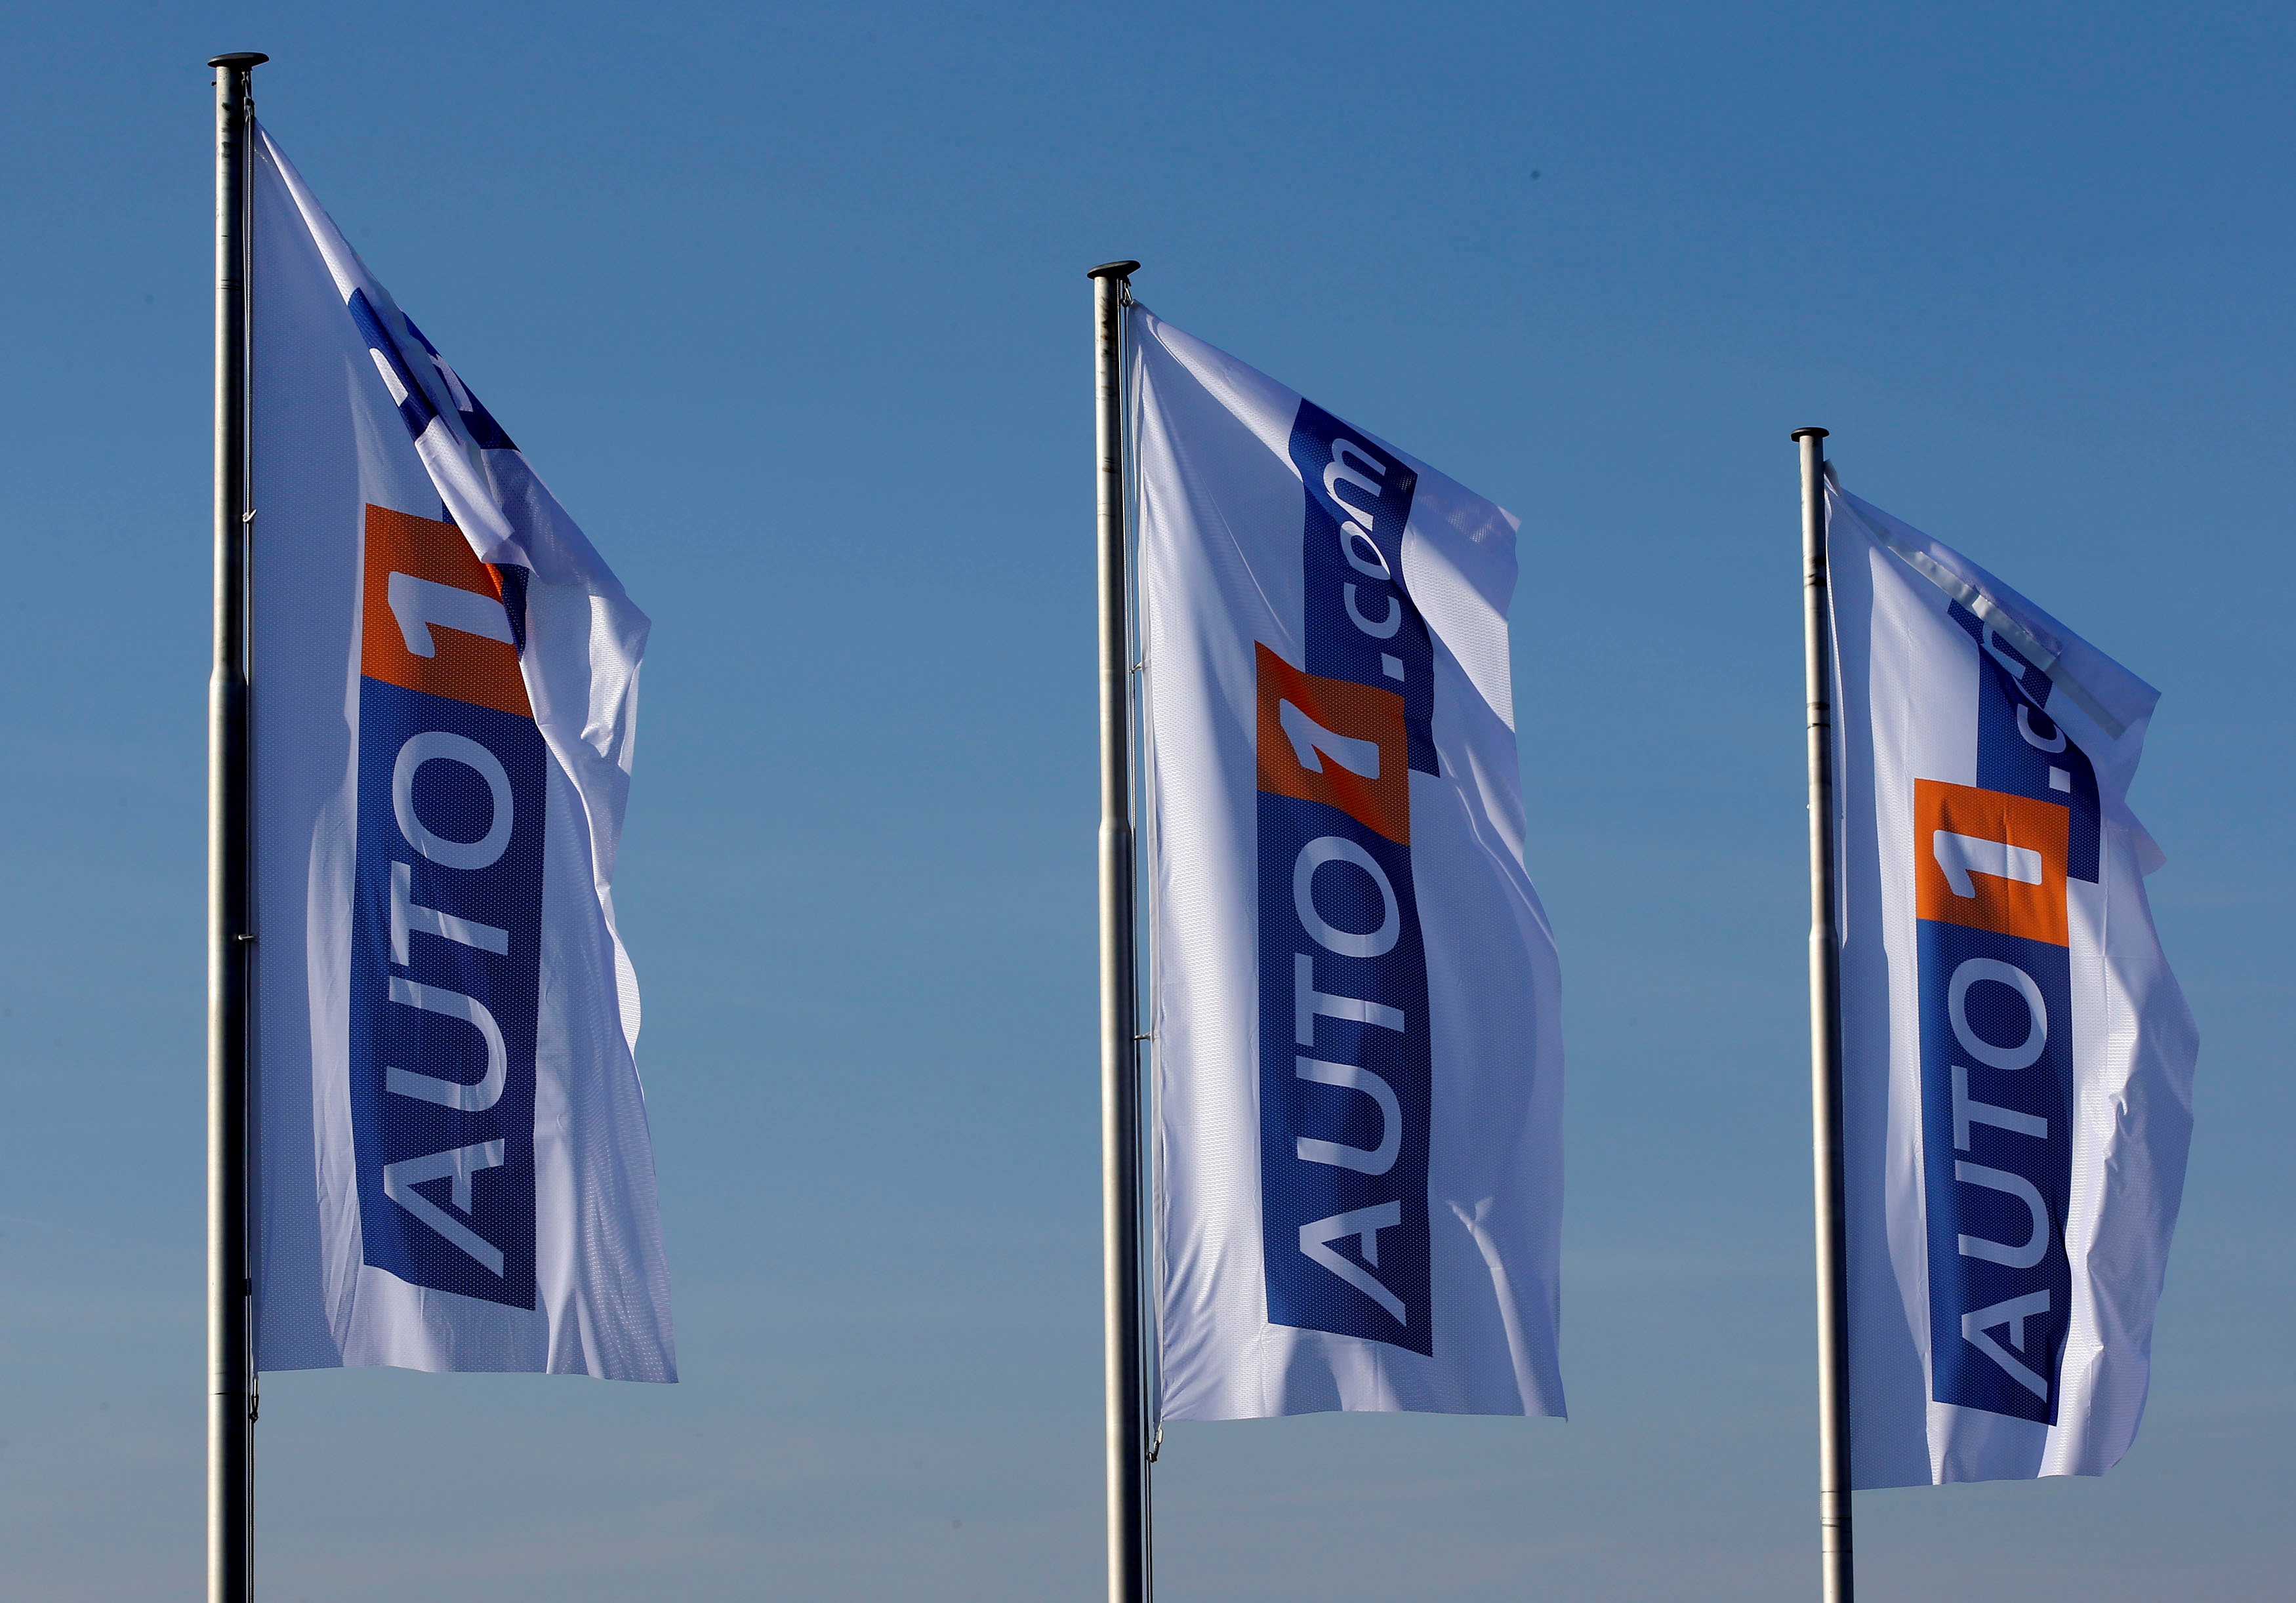 Flags bearing the AUTO1 logo pictured at the company grounds in Zoerbig, Germany